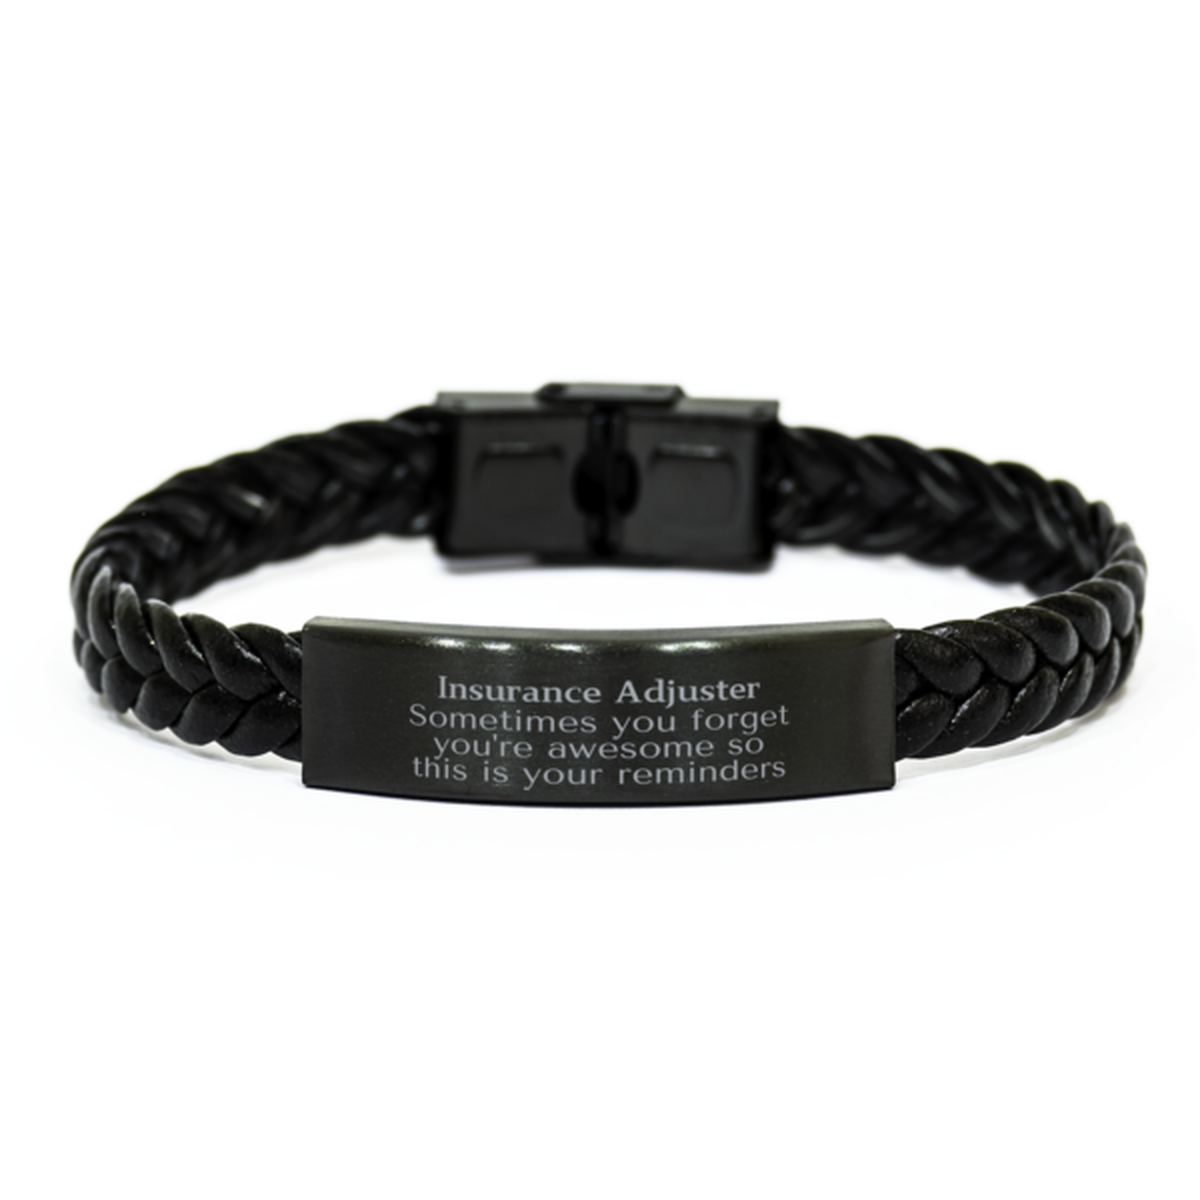 Sentimental Insurance Adjuster Braided Leather Bracelet, Insurance Adjuster Sometimes you forget you're awesome so this is your reminders, Graduation Christmas Birthday Gifts for Insurance Adjuster, Men, Women, Coworkers